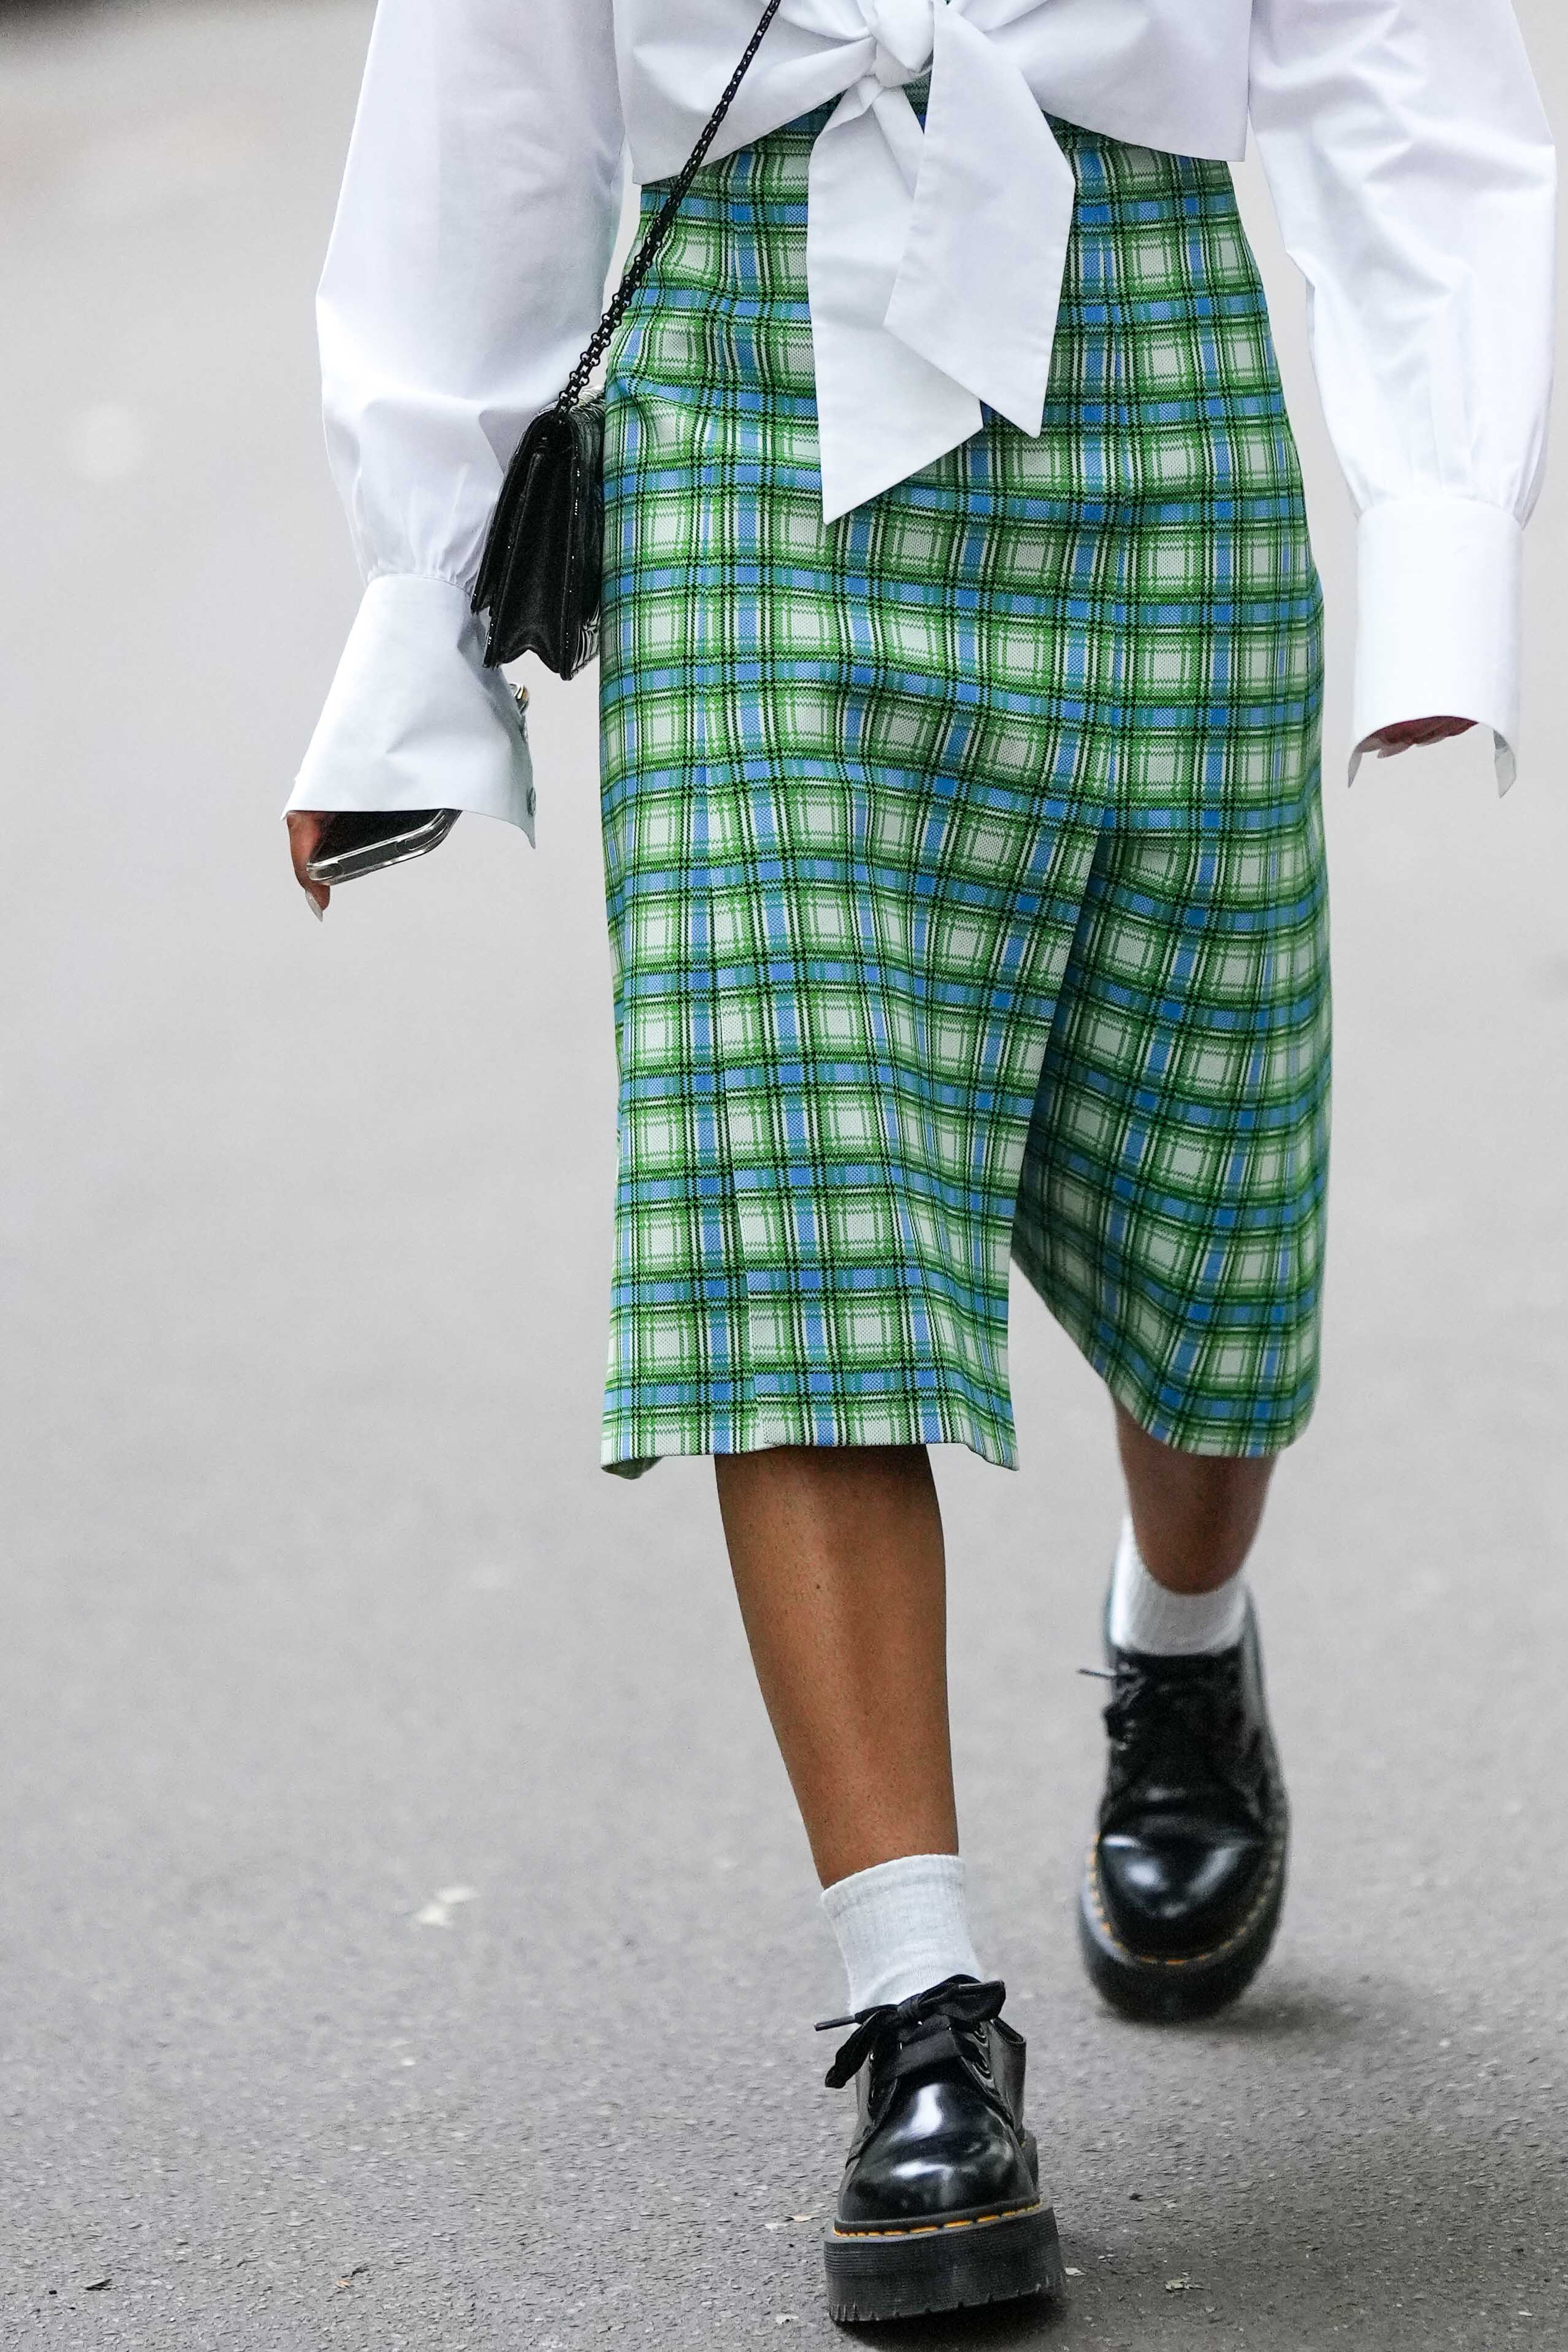 The Prada patent-leather loafers fashion girls can't stop wearing